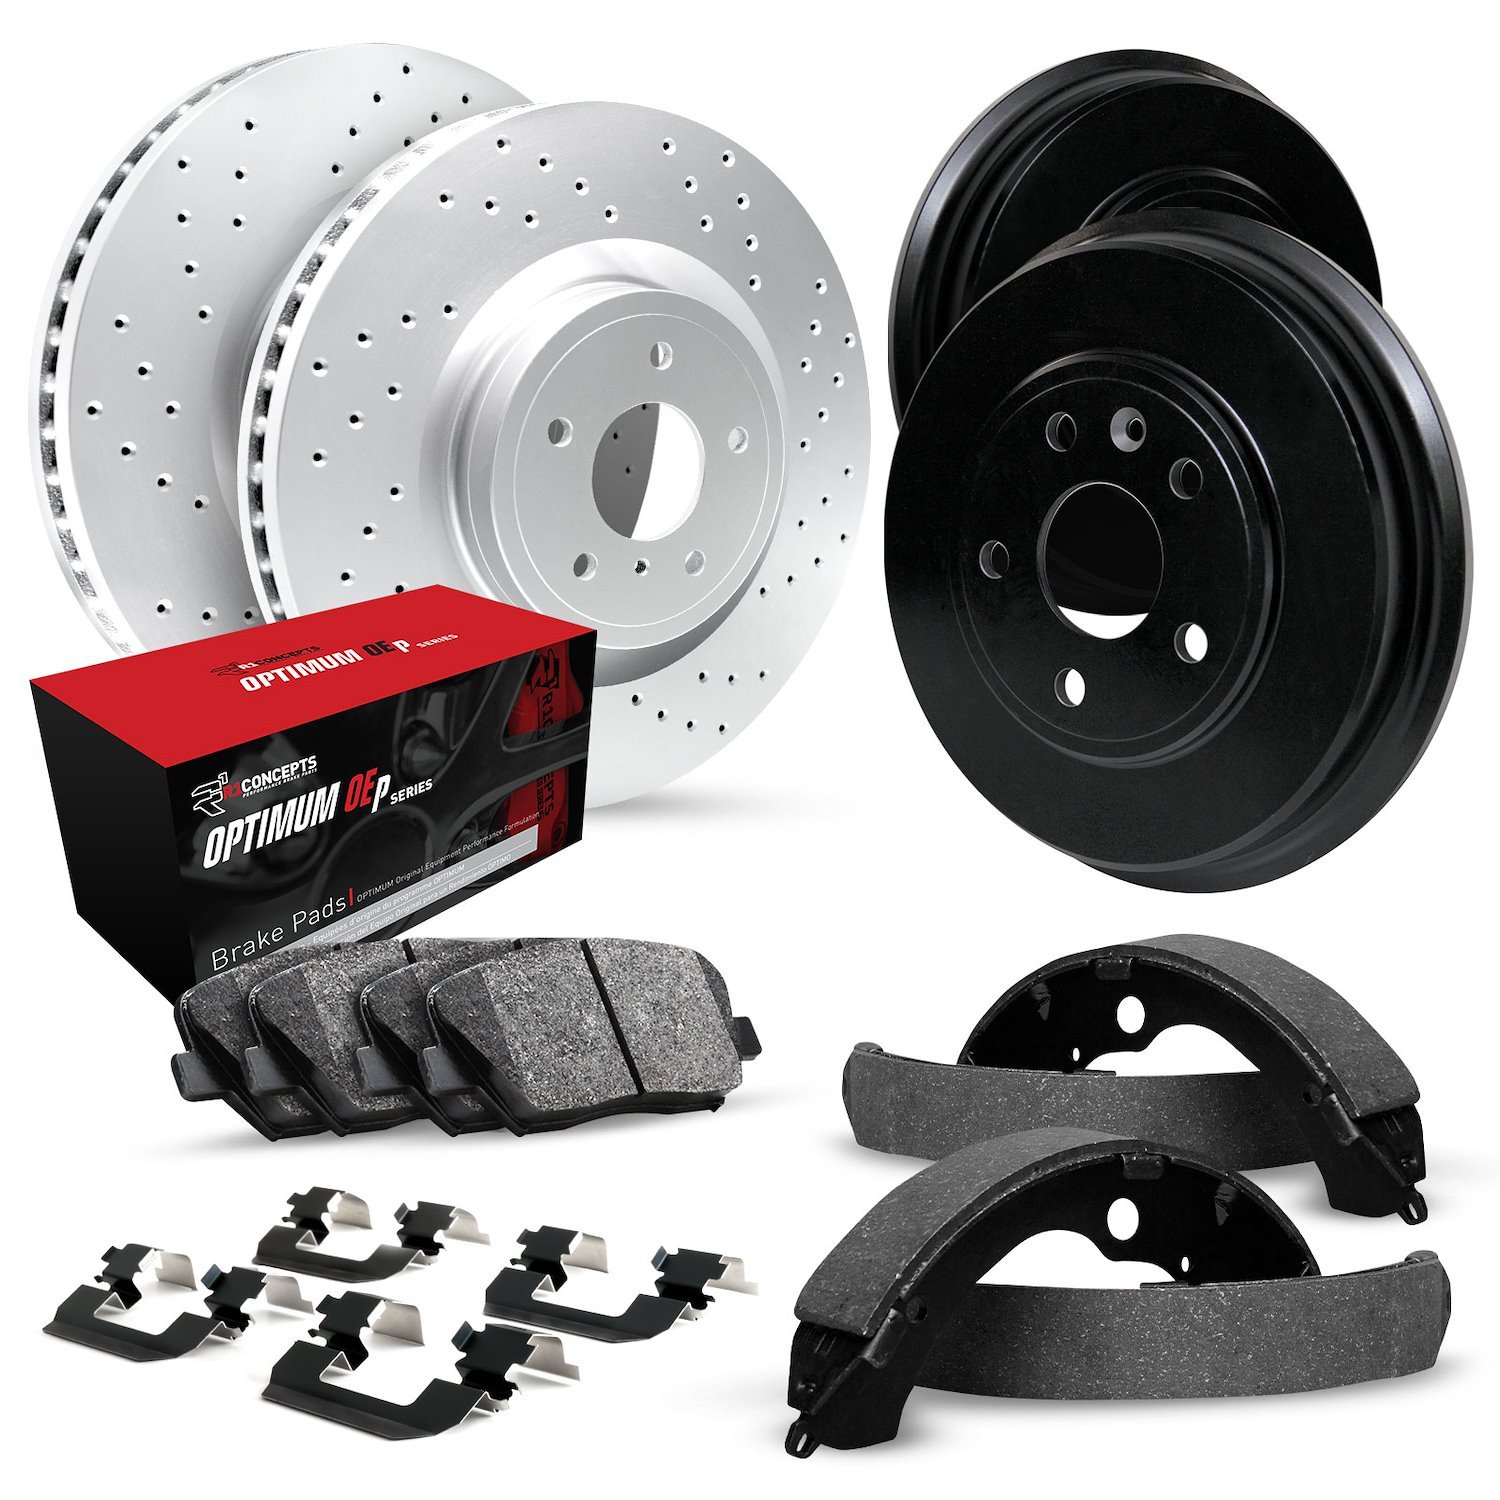 GEO-Carbon Drilled Brake Rotor & Drum Set w/Optimum OE Pads, Shoes, & Hardware, 1971-1990 GM, Position: Front & Rear